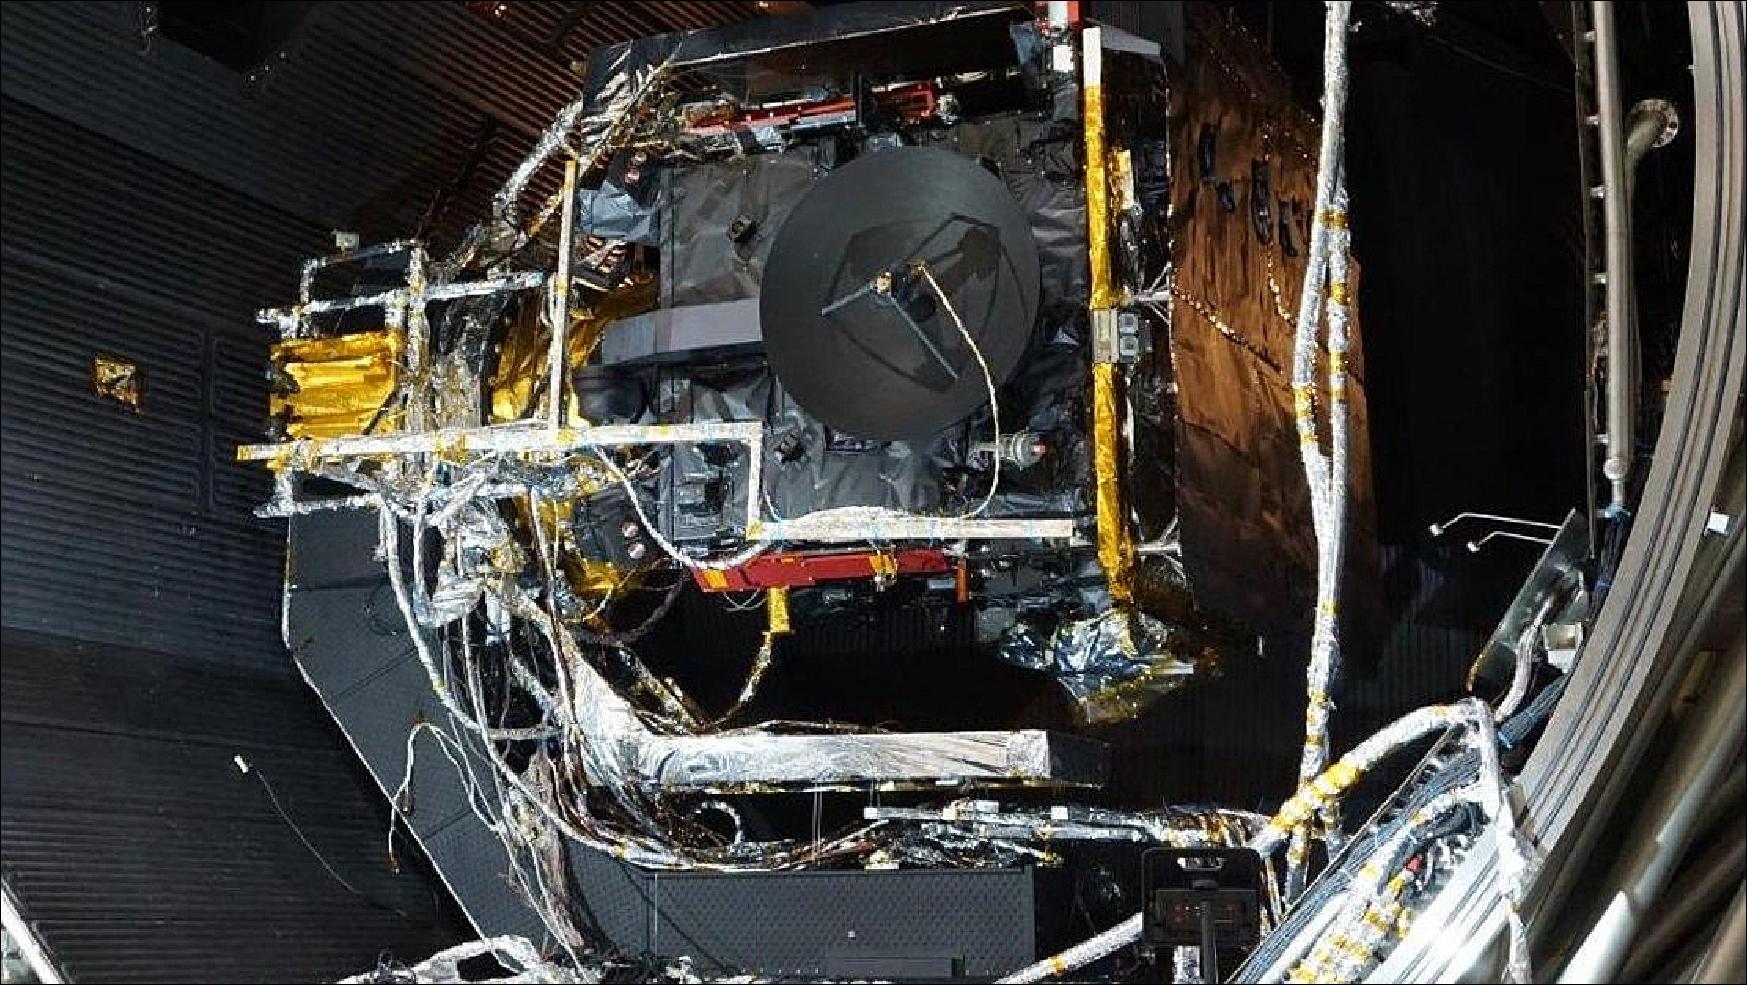 Figure 16: A side view of ESA's Solar Orbiter as it entered a vacuum chamber for thermal vacuum testing at the IABG test facility in Ottobrunn, Germany, last month (image credit: Airbus DS)